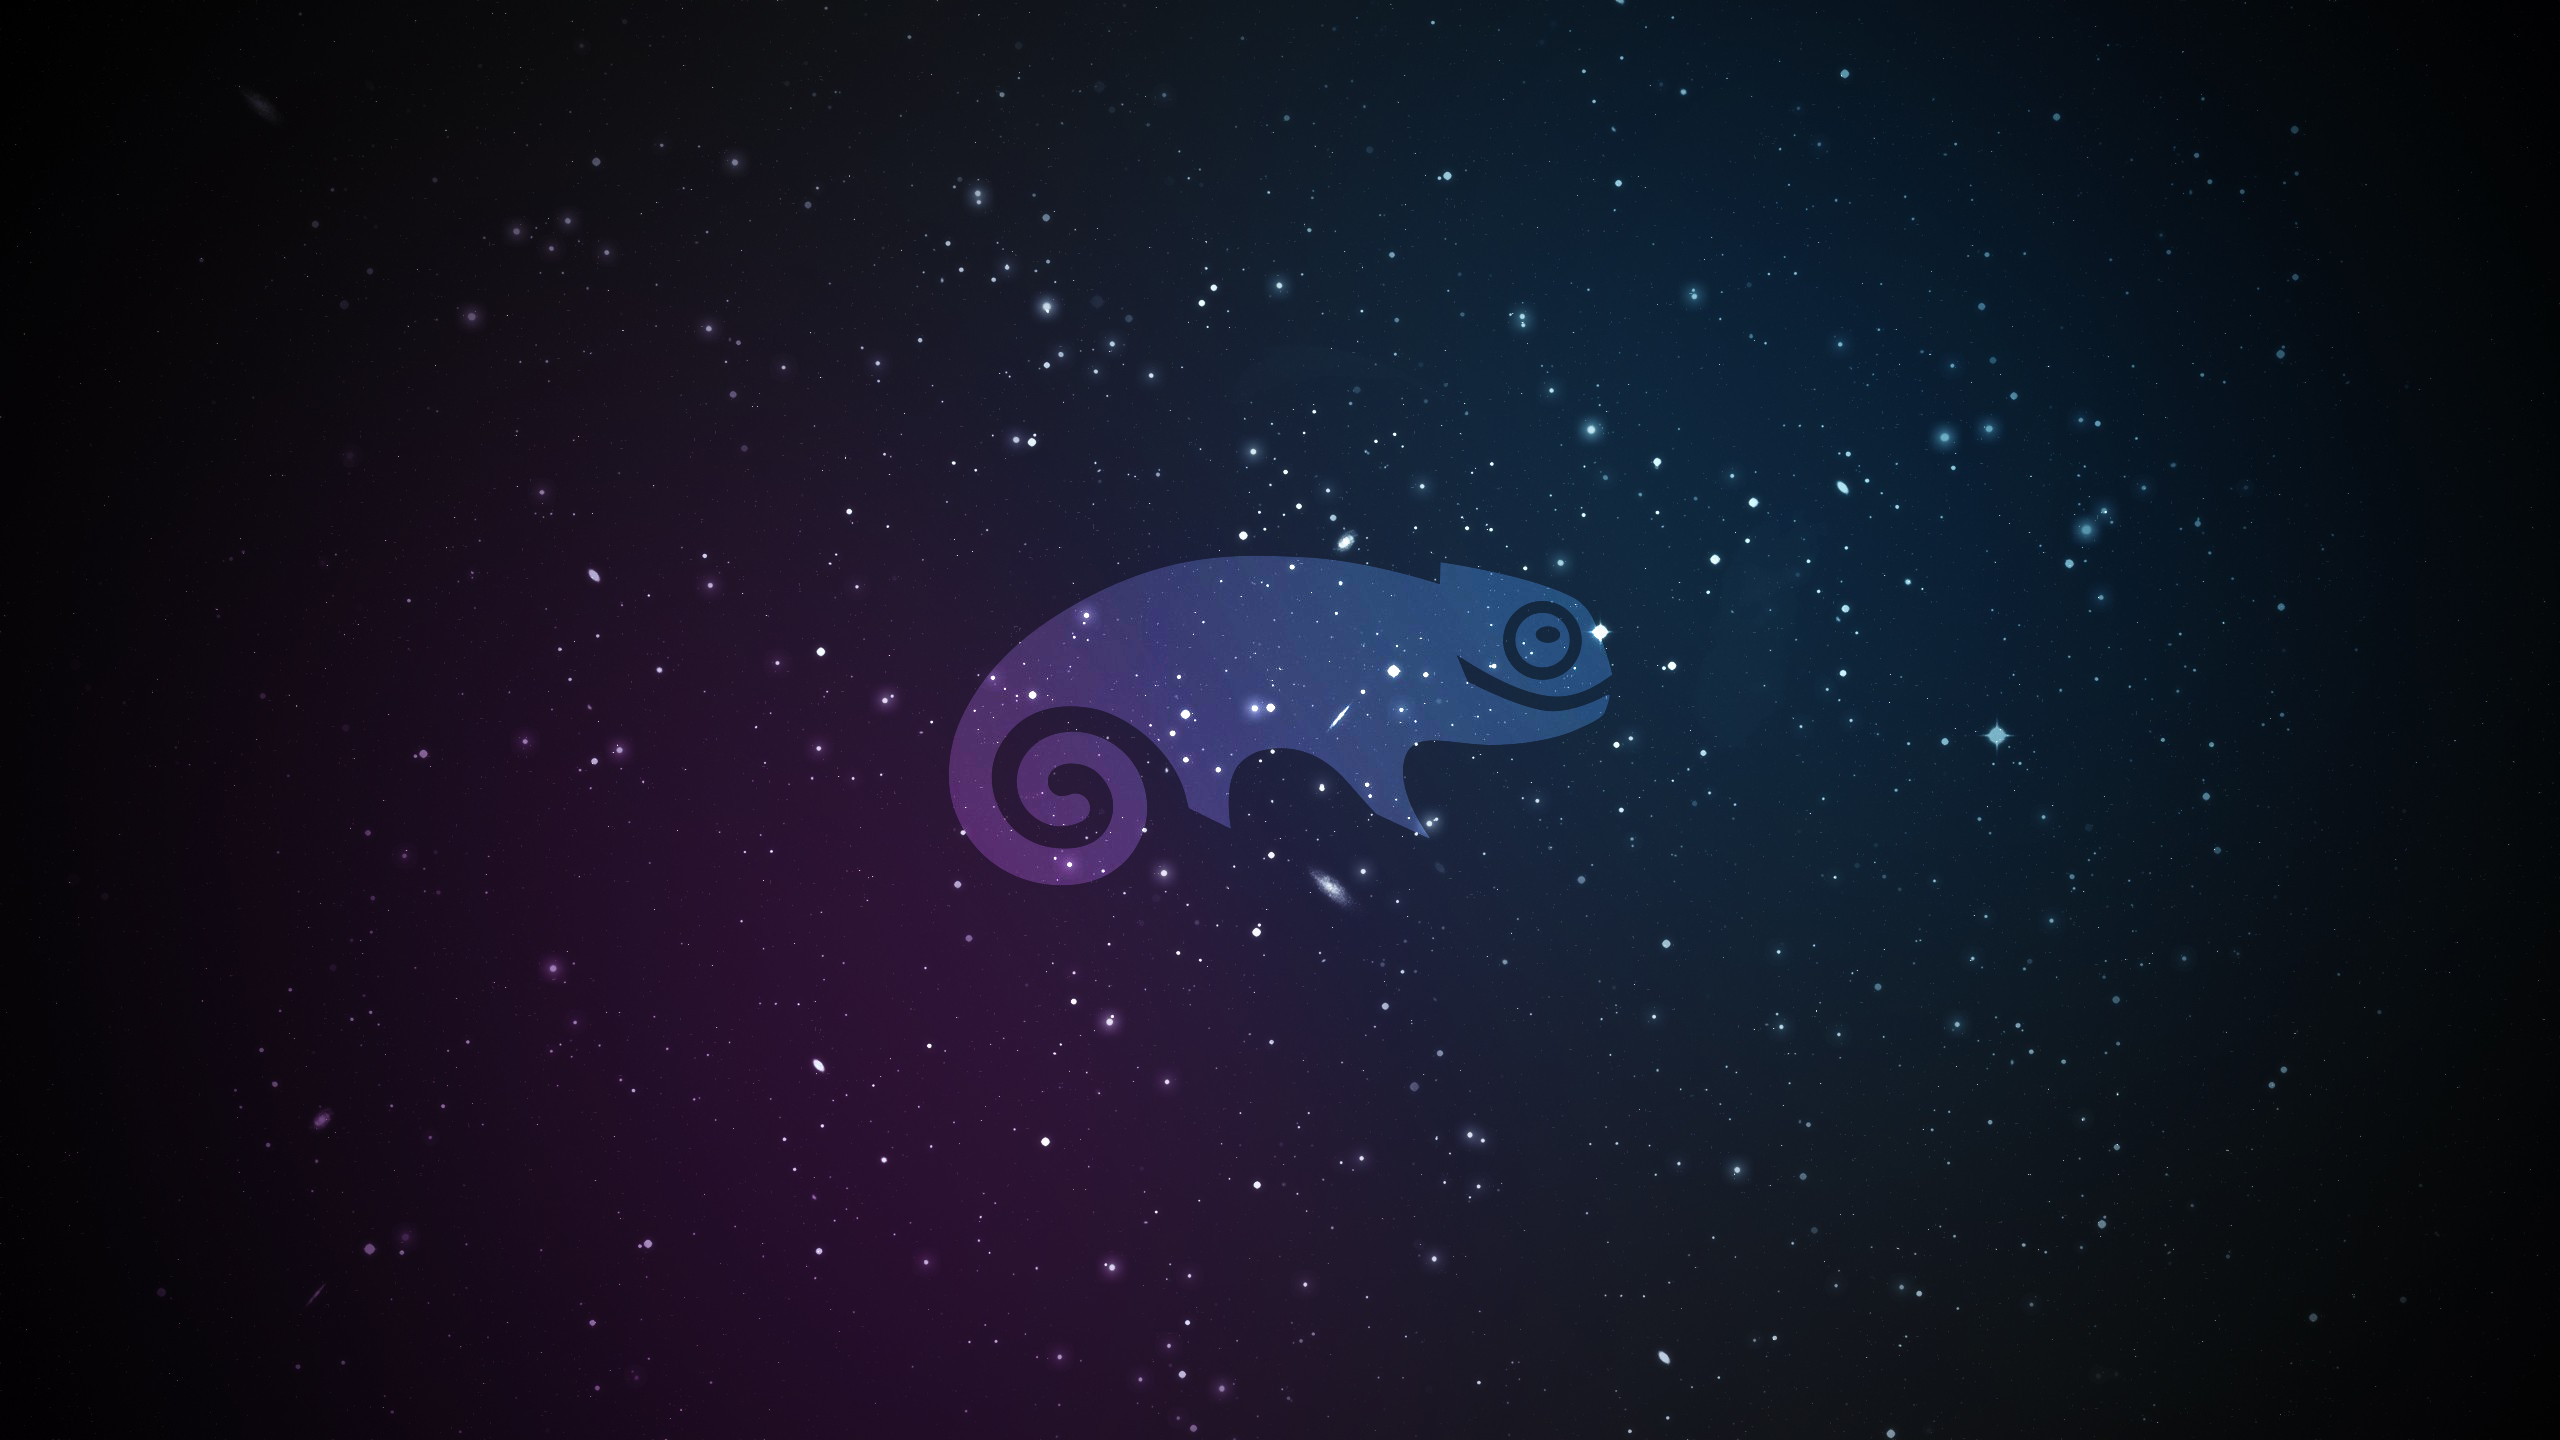 opensuse, Galaxy, Linux, Space, Stars Wallpaper